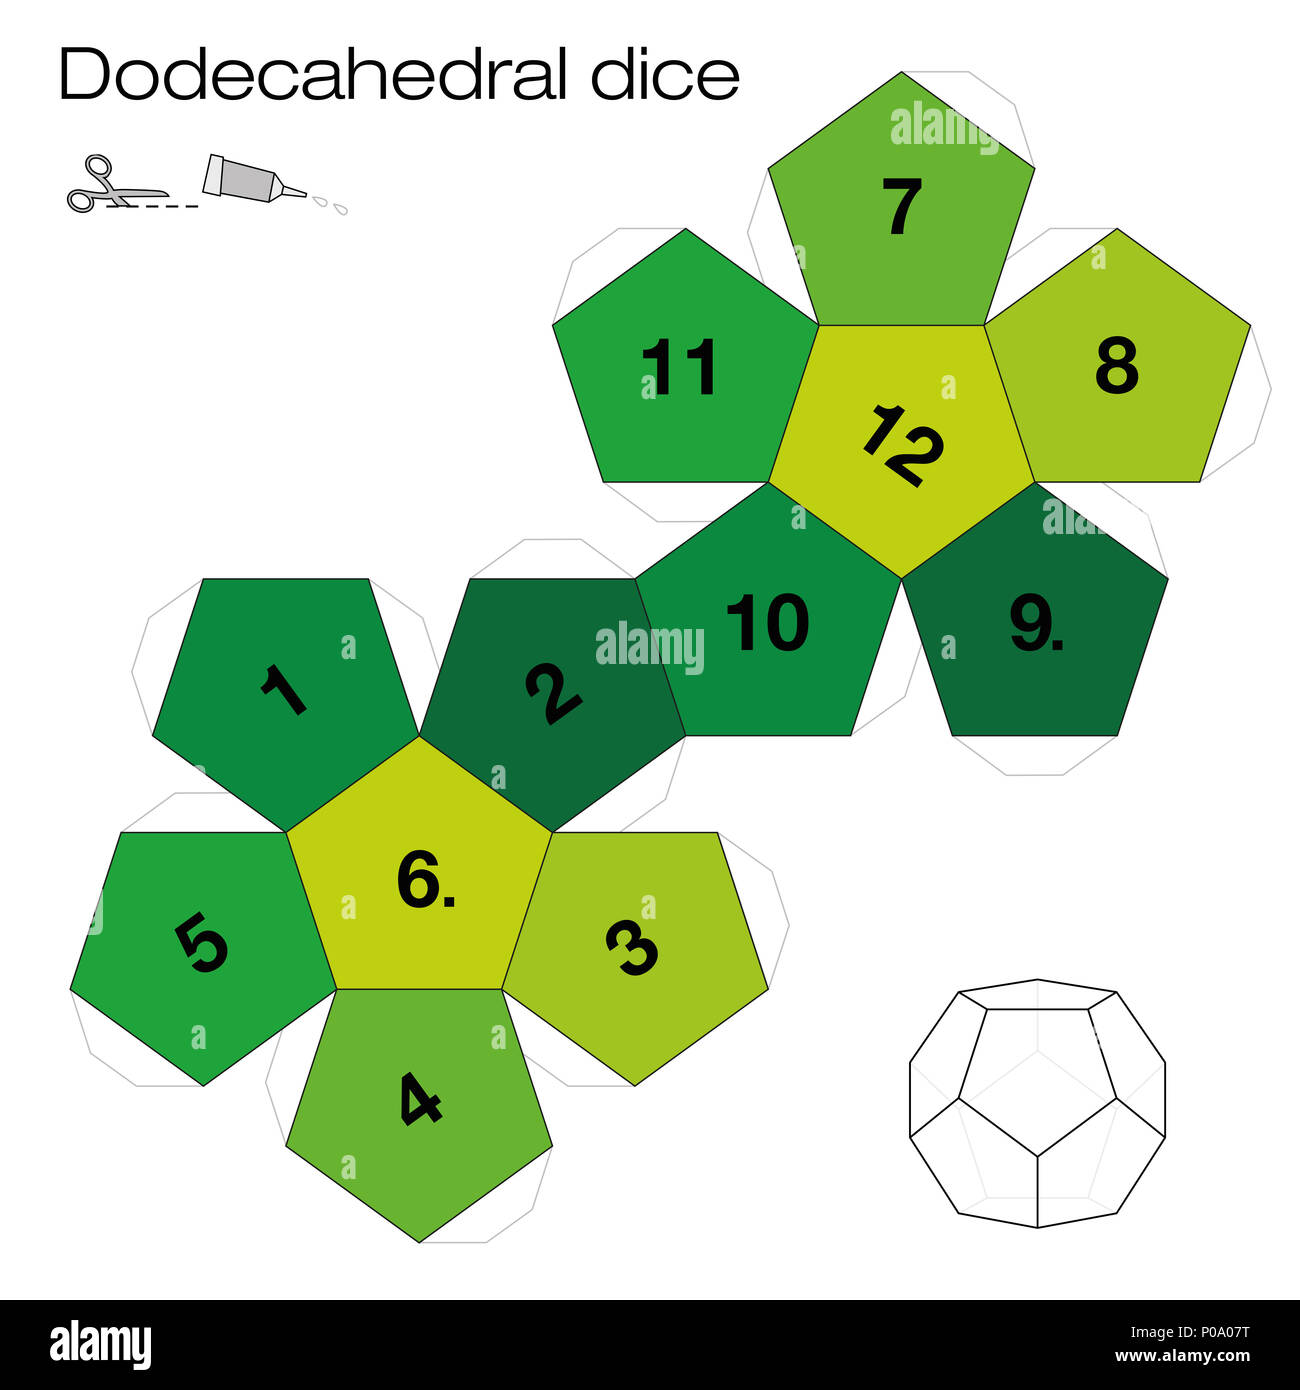 Dodecahedron template, dodecahedral dice - one of the five platonic solids - make a 3d item with twelve sides out of the net and play dice. Stock Photo